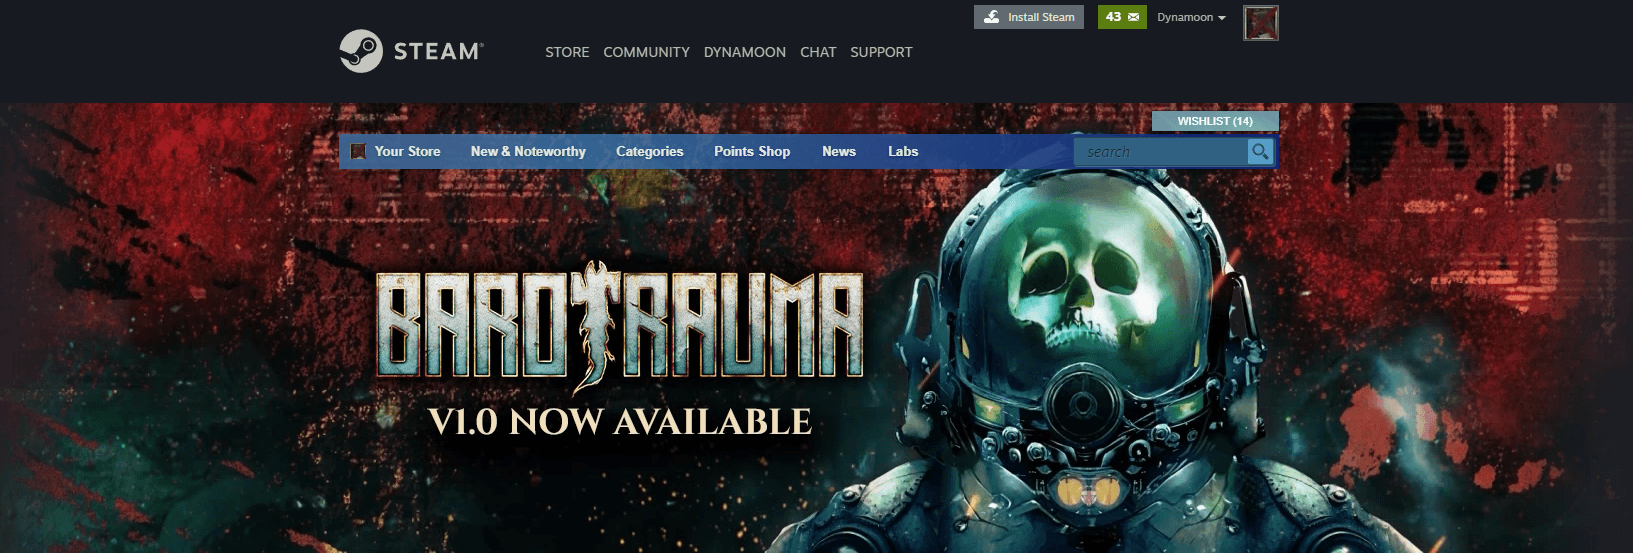 Barotrauma Steam front page takeover